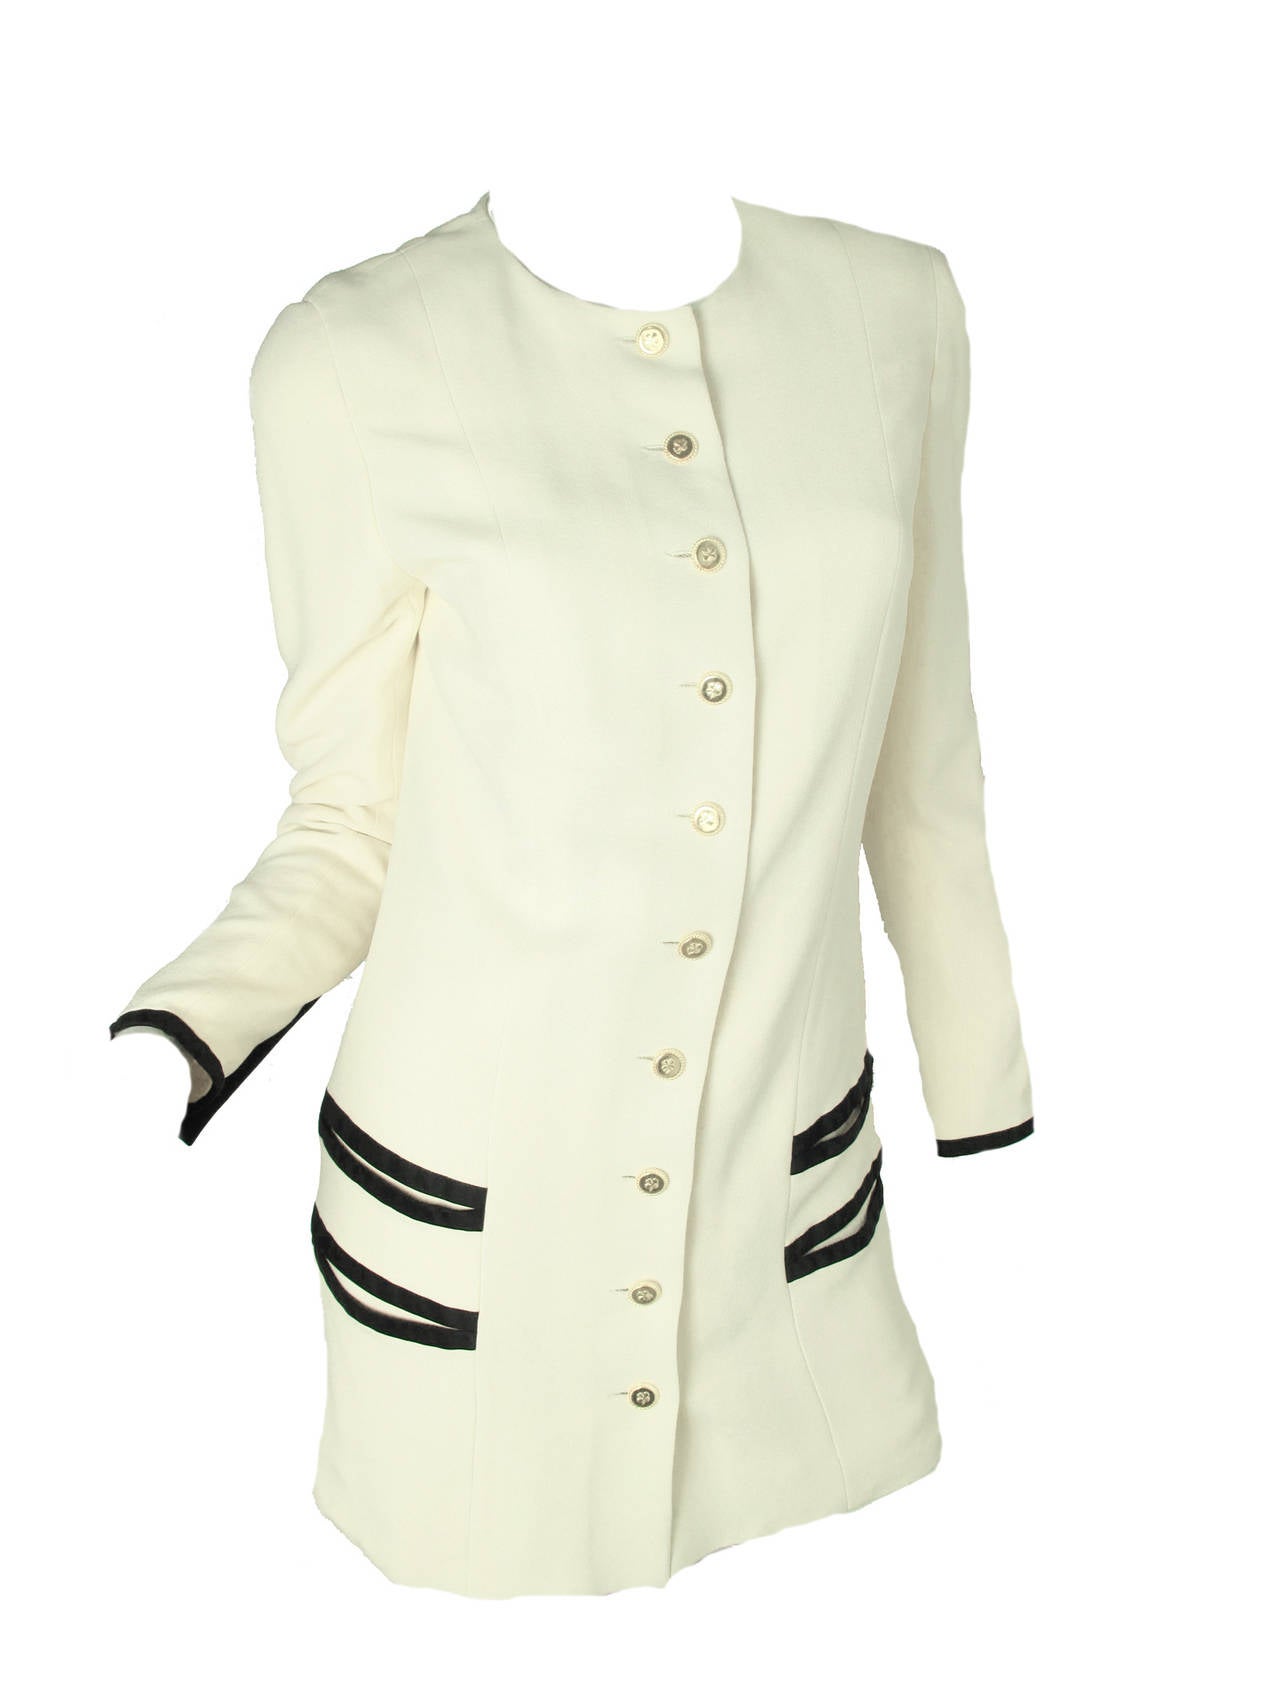 Chanel Silk long jacket and pleated skirt, clover buttons. Four front pockets on jacket.  Condition:  good, small spot on sleeve and black marker on inside lining at hem. Size 40

We accept returns for refund, please see our terms.  Free Ground